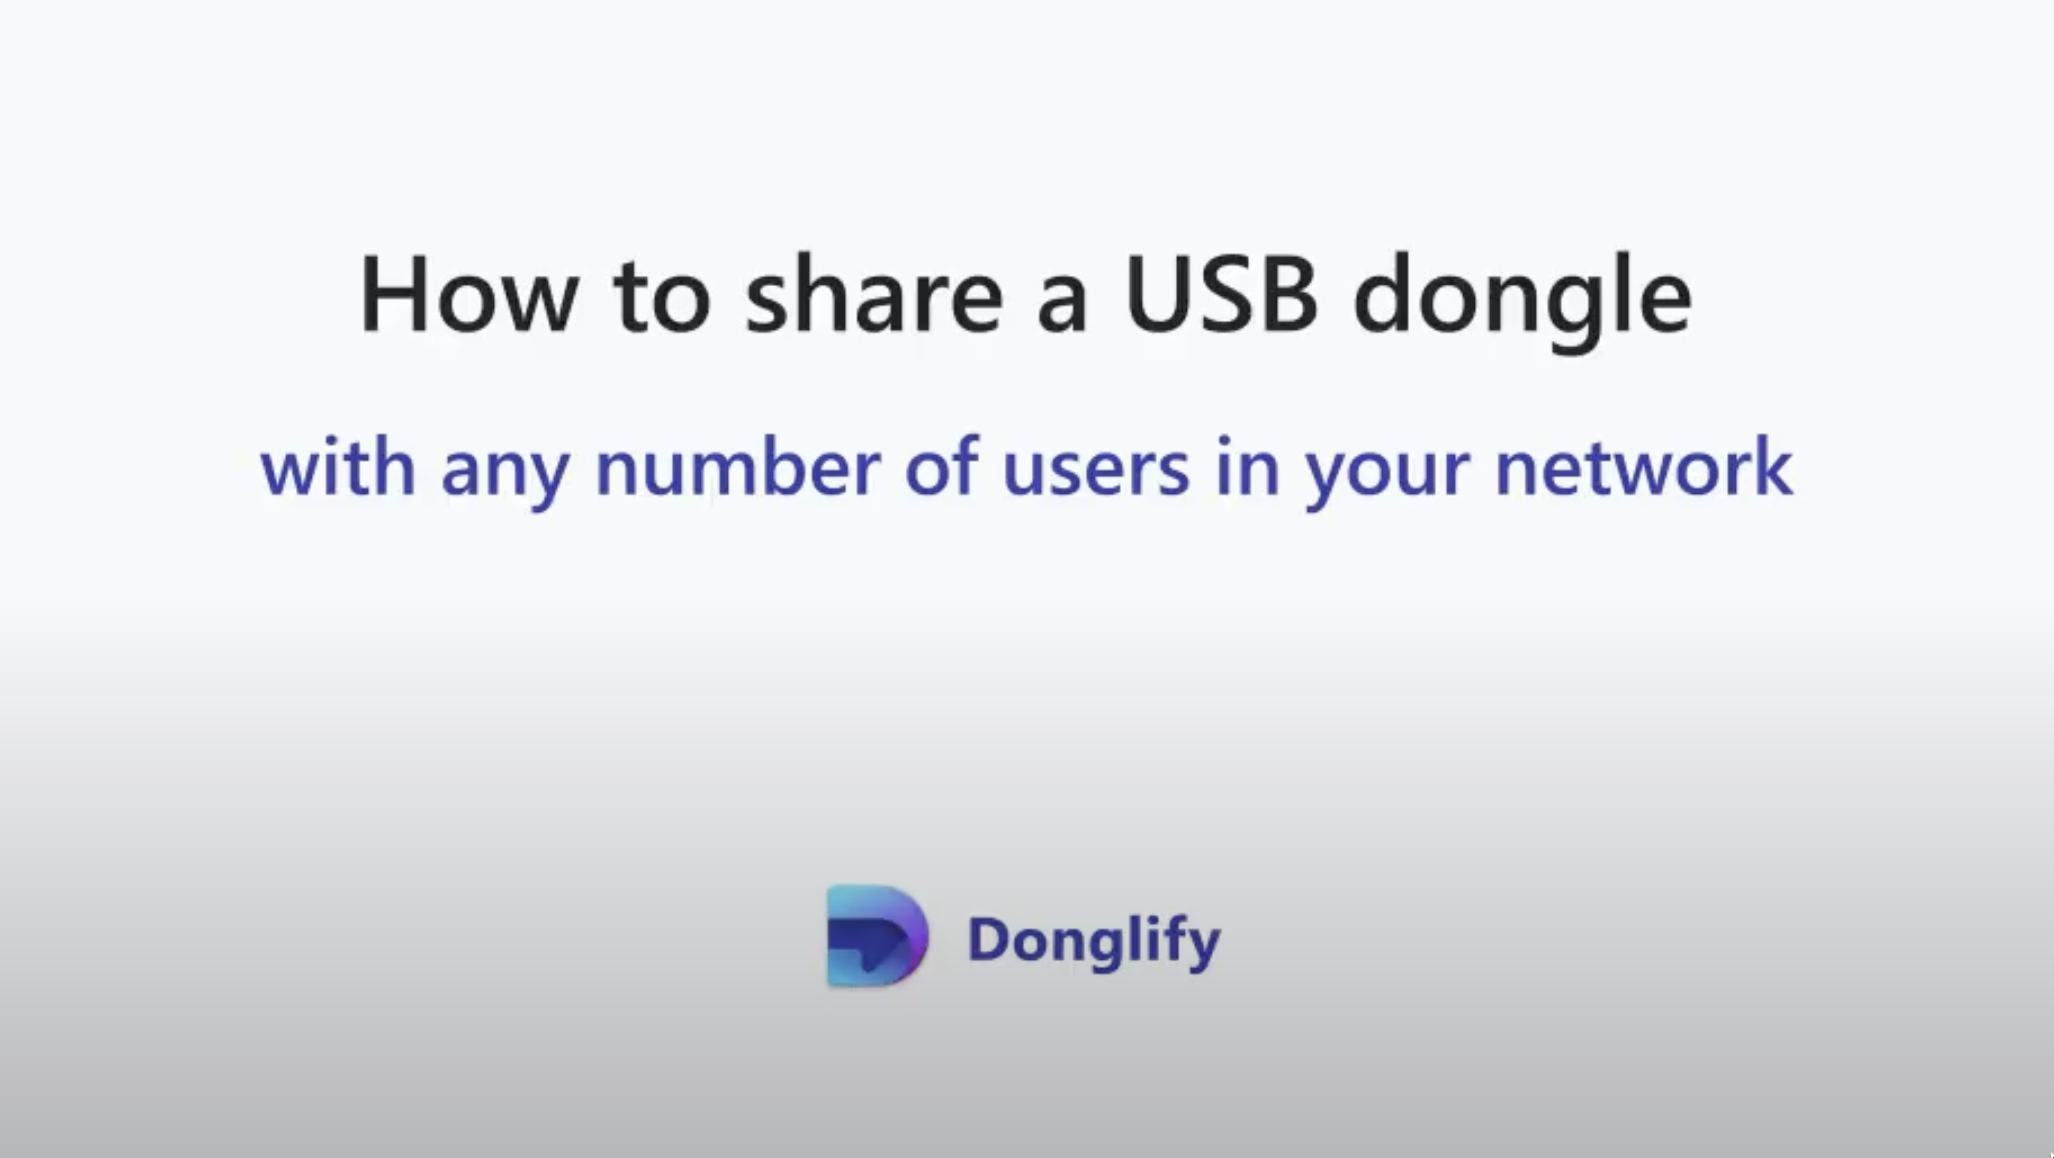  Donglify